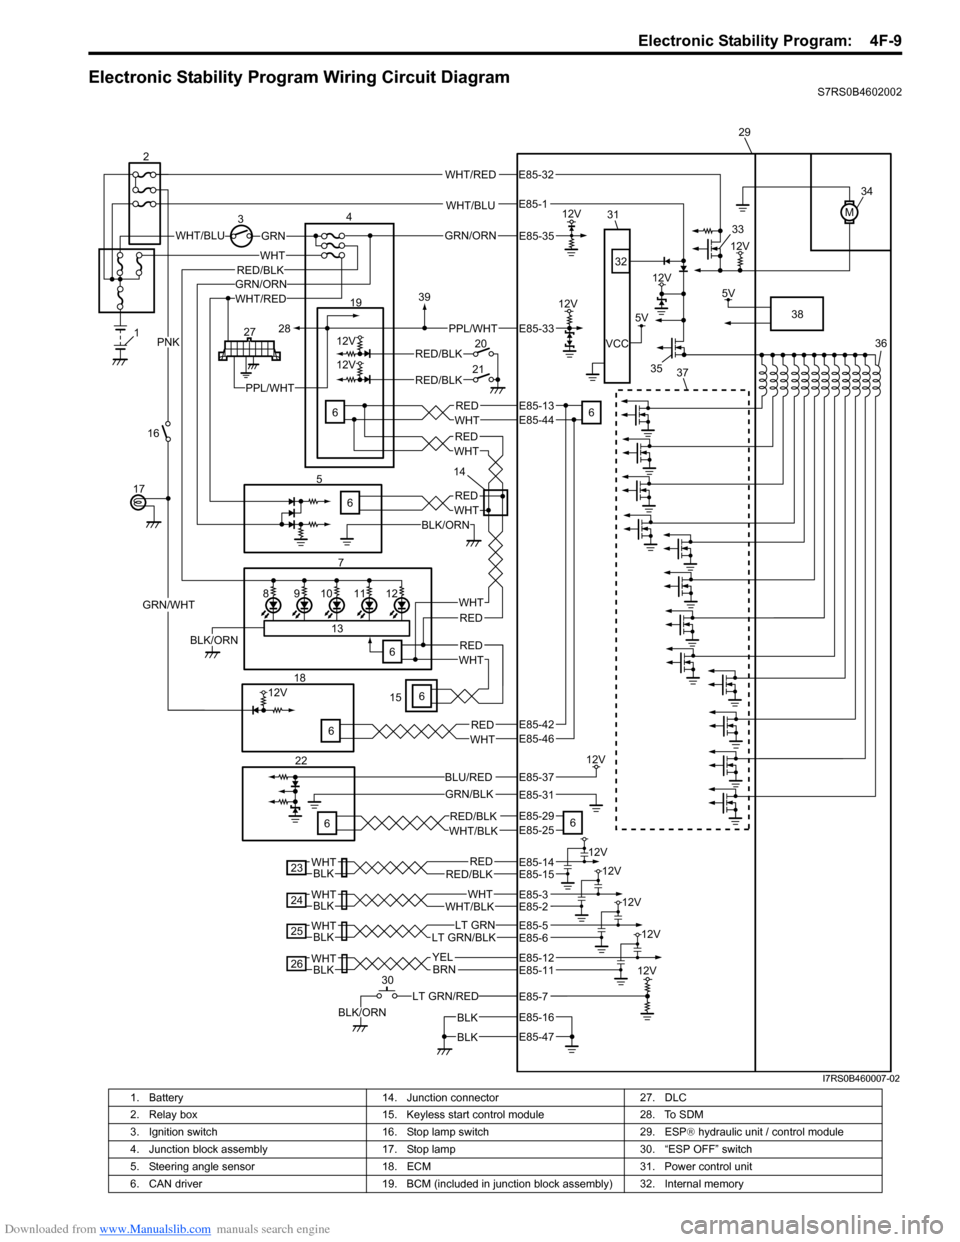 SUZUKI SWIFT 2007 2.G Service User Guide Downloaded from www.Manualslib.com manuals search engine Electronic Stability Program:  4F-9
Electronic Stability Program Wiring Circuit DiagramS7RS0B4602002
WHT/BLU
WHT/BLUGRN
M
12V3
12V
5V
12V
VCC
W